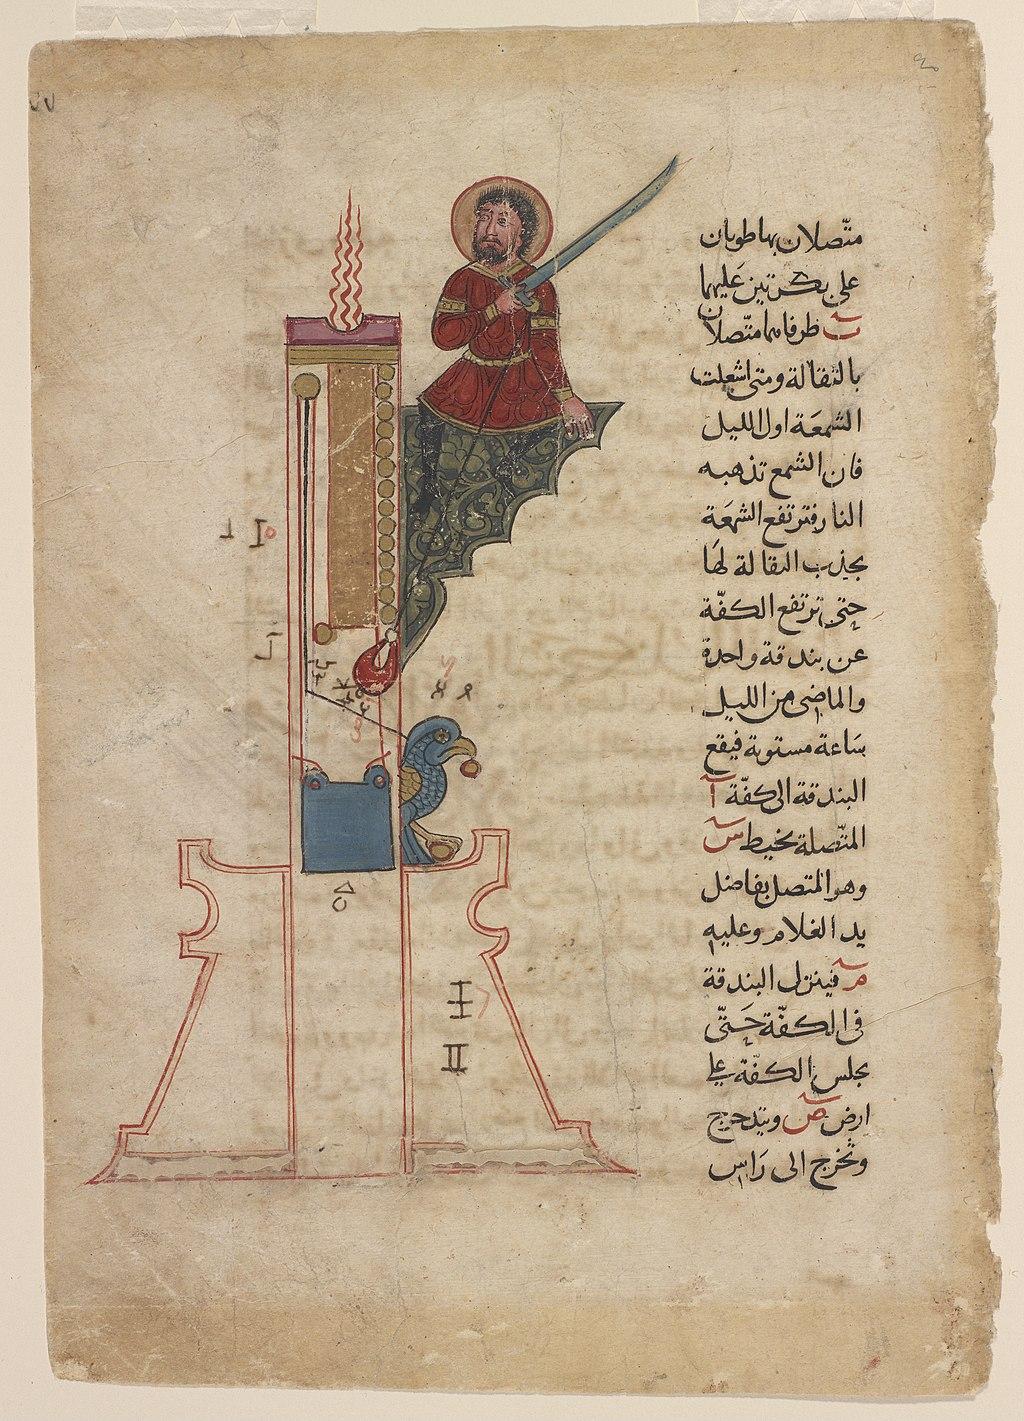 Al-Jazari's candle clock device from 1206 featured a display dial that told time. (<a href="https://commons.wikimedia.org/wiki/File:Al-Jazari_-_A_Candle_Clock.jpg">Public Domain</a>)